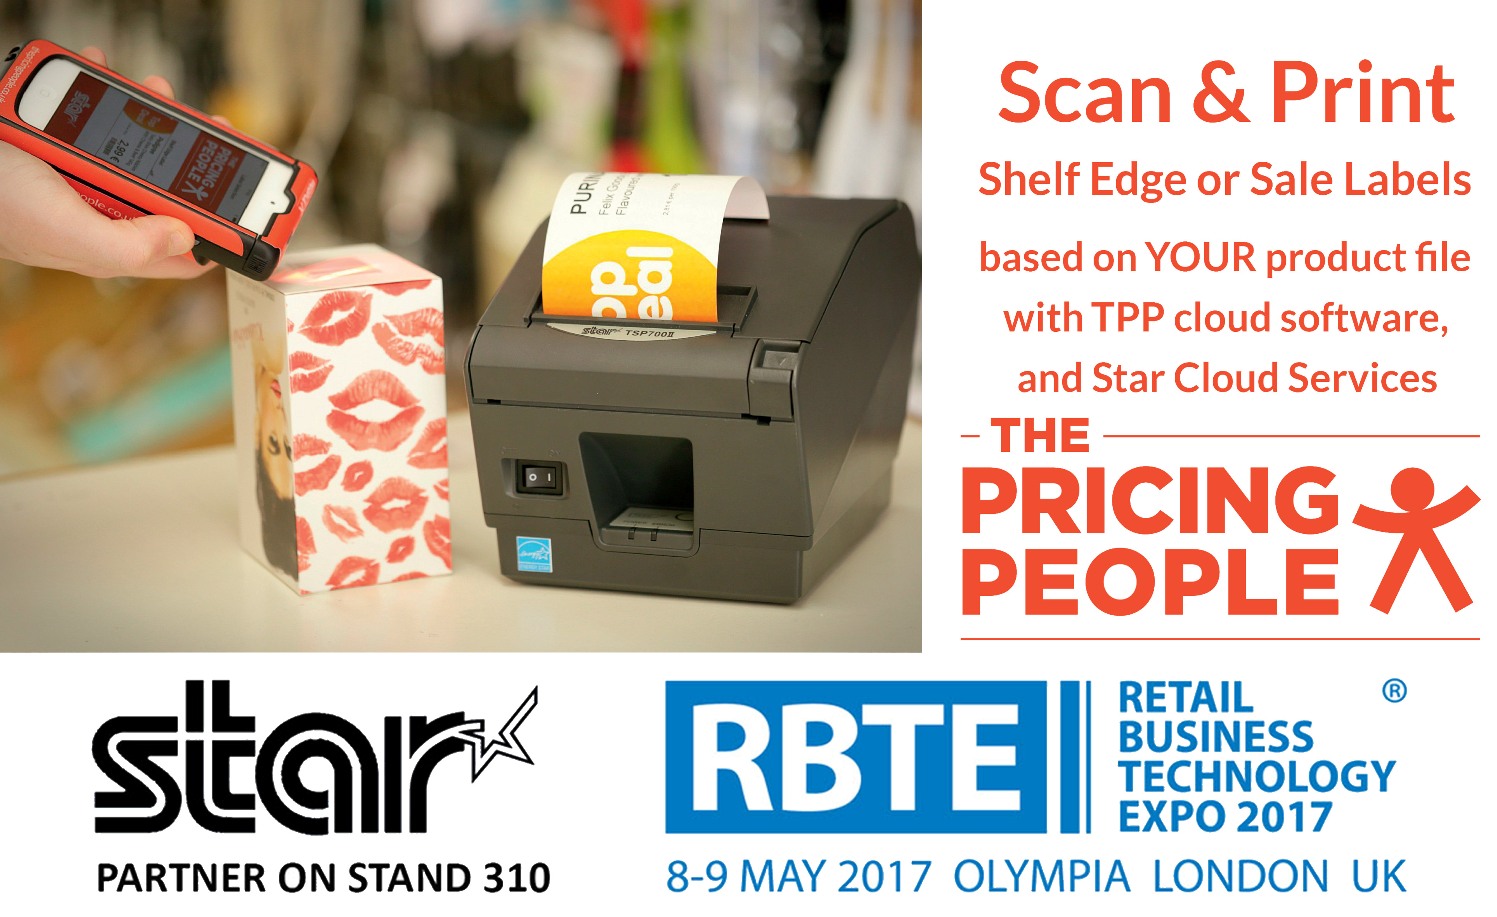 http://www.realwire.com/writeitfiles/Realwire-Star-The-Pricing-People-RBTE-2017-image.jpg